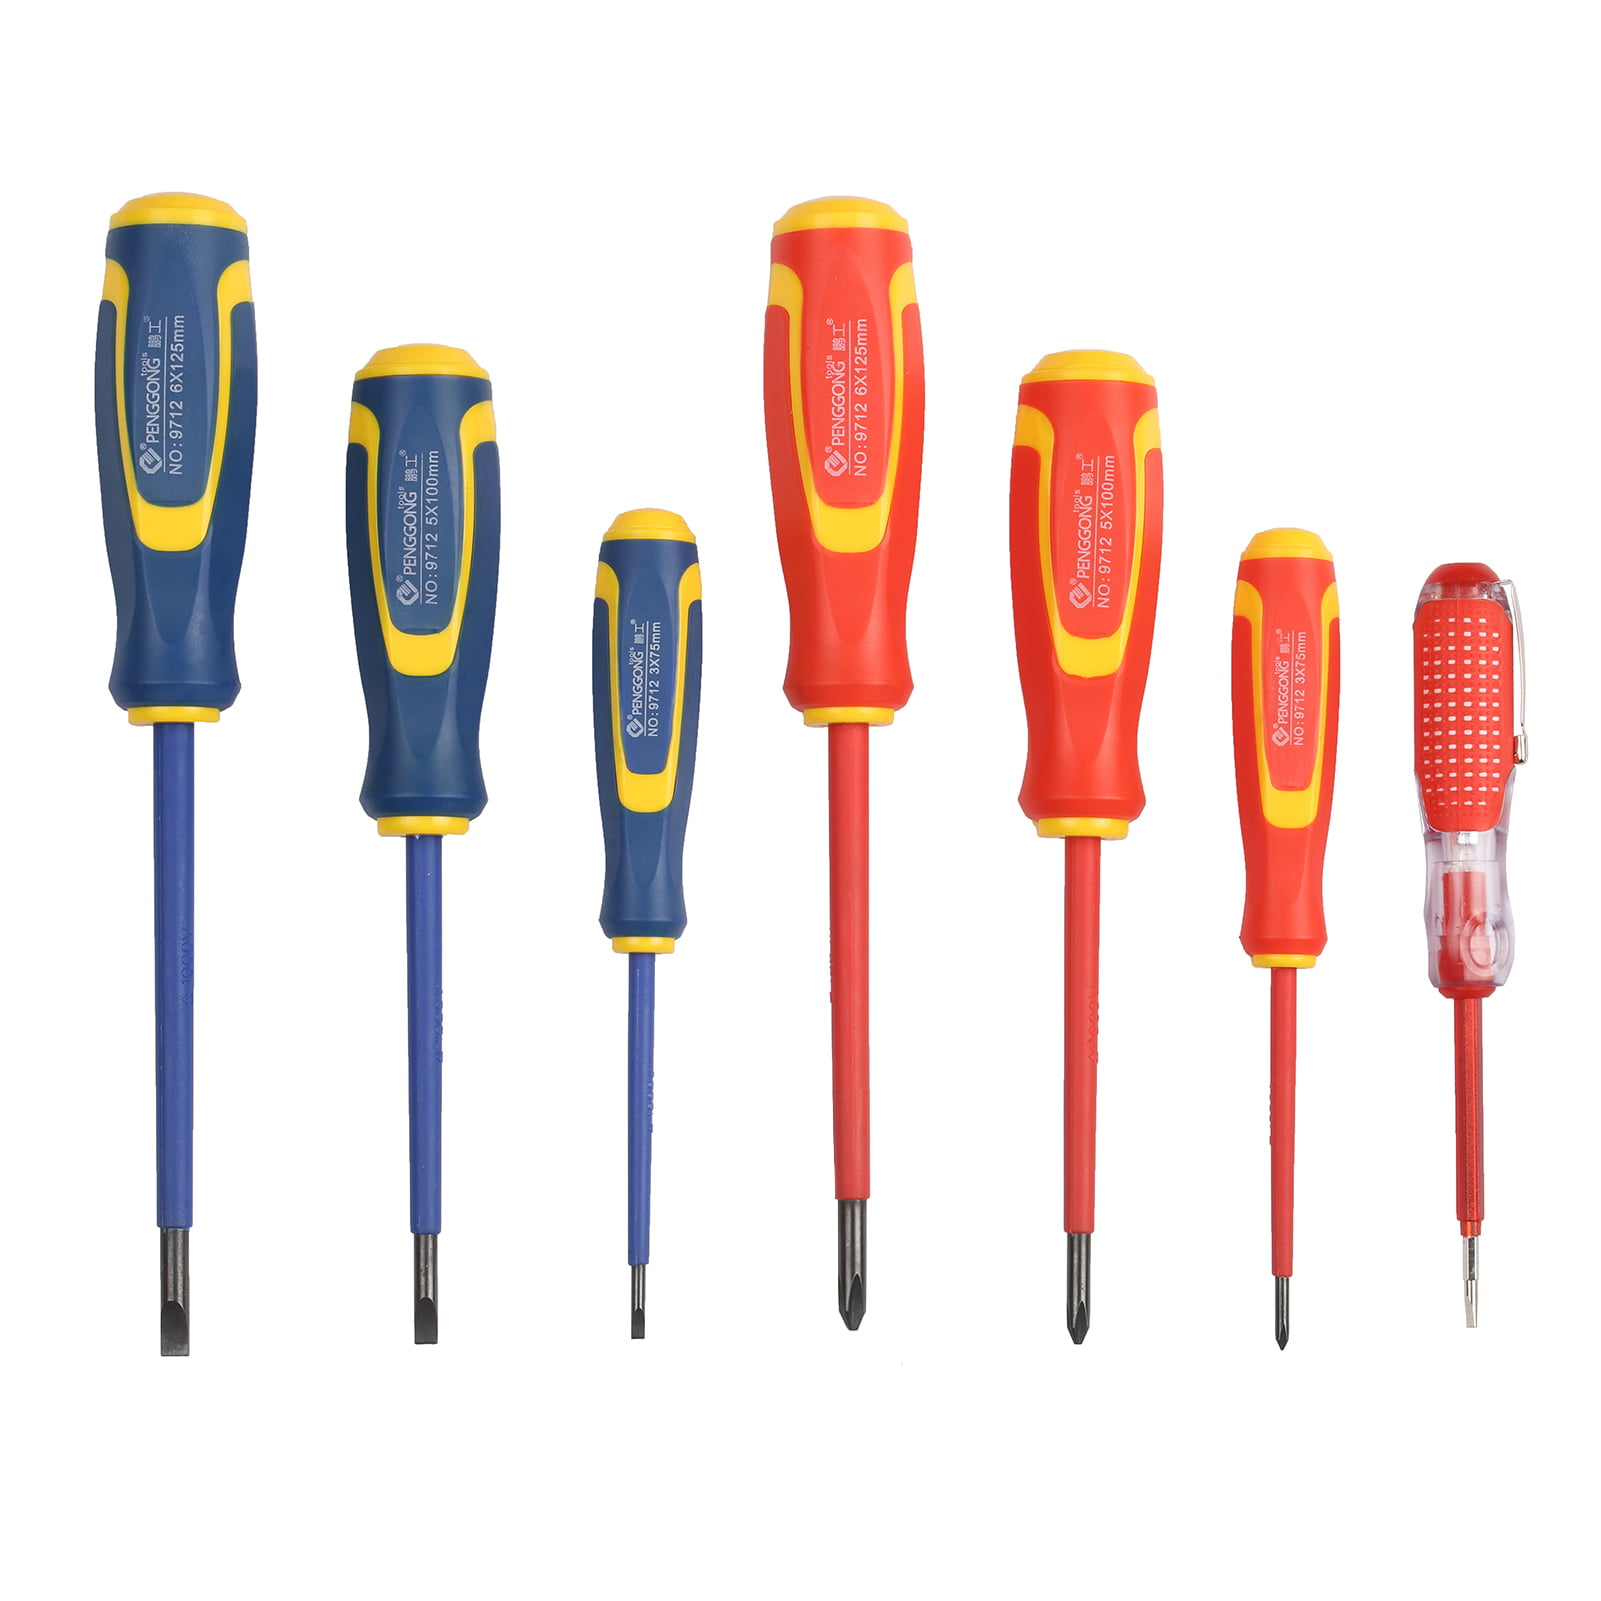 Steel Multi-purpose Electricians Insulated Electrical Hand Screwdriver Tool 